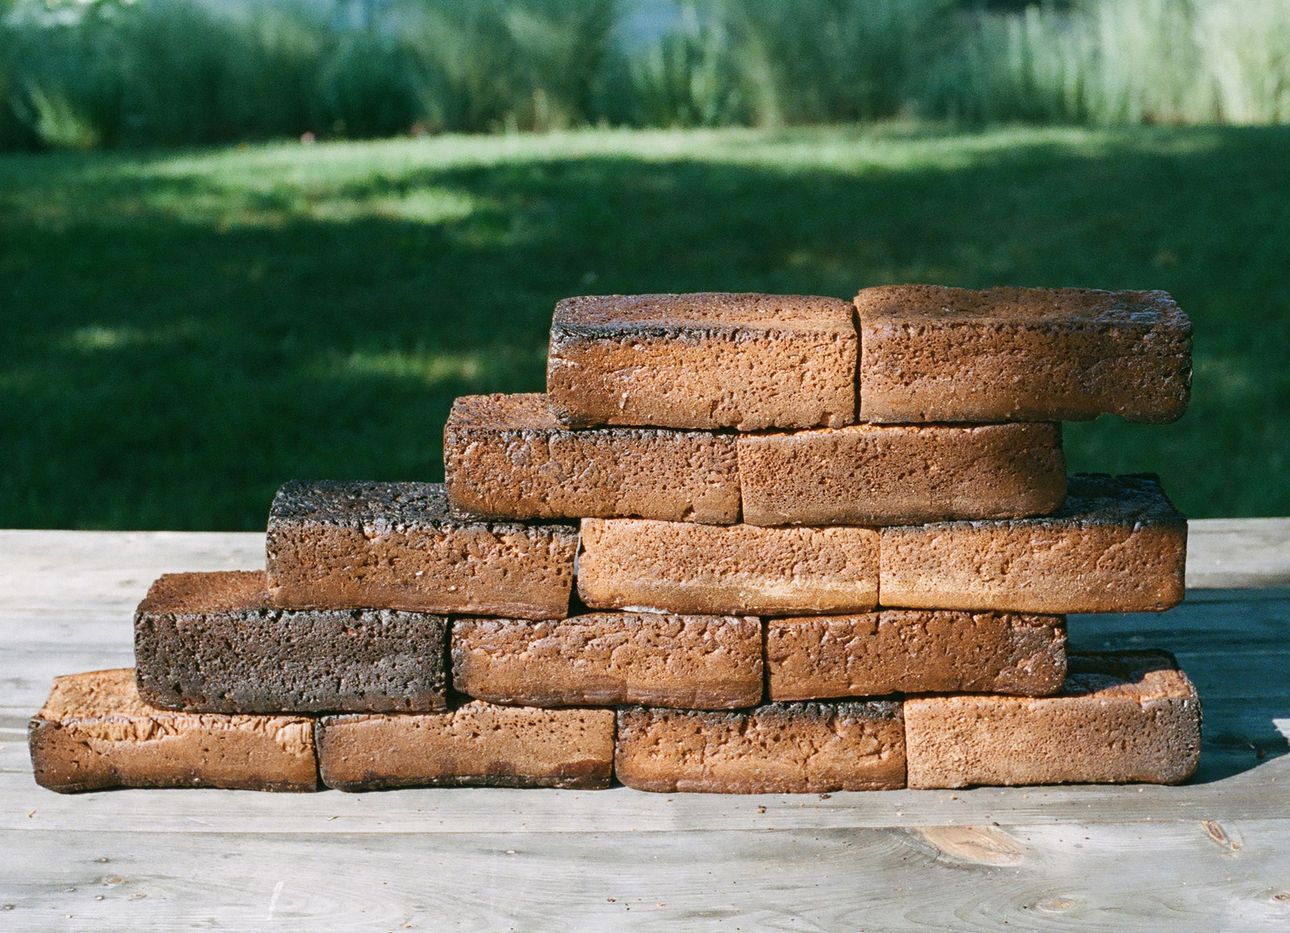 A stack of brick-like bread loaves with a green lawn in the background.